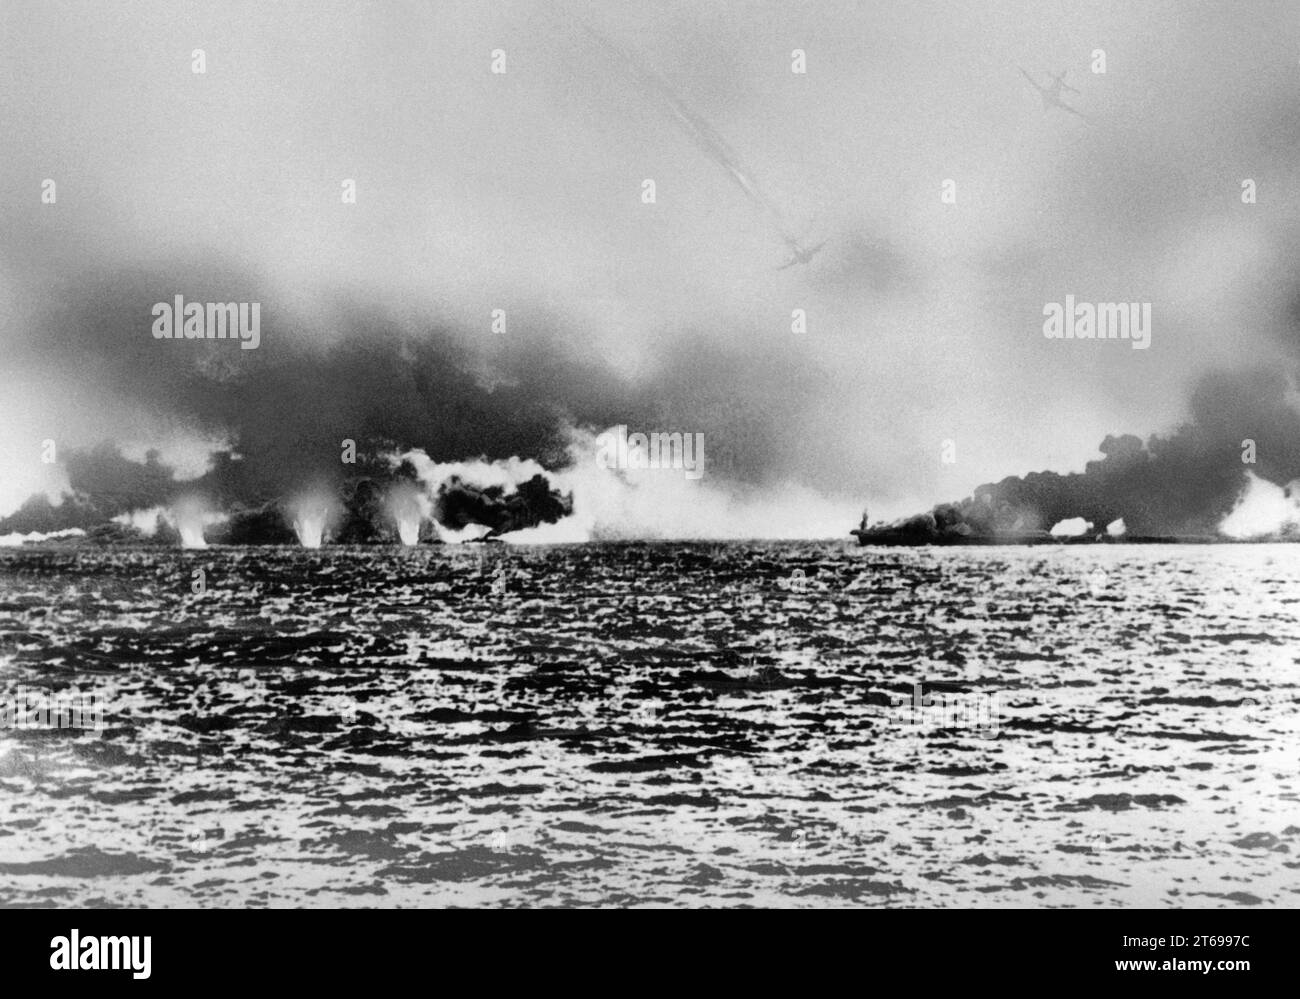 Japanese kamikaze planes attack the American aircraft carrier USS Swanny during the 2nd naval battle for the Philippines. [automated translation] Stock Photo